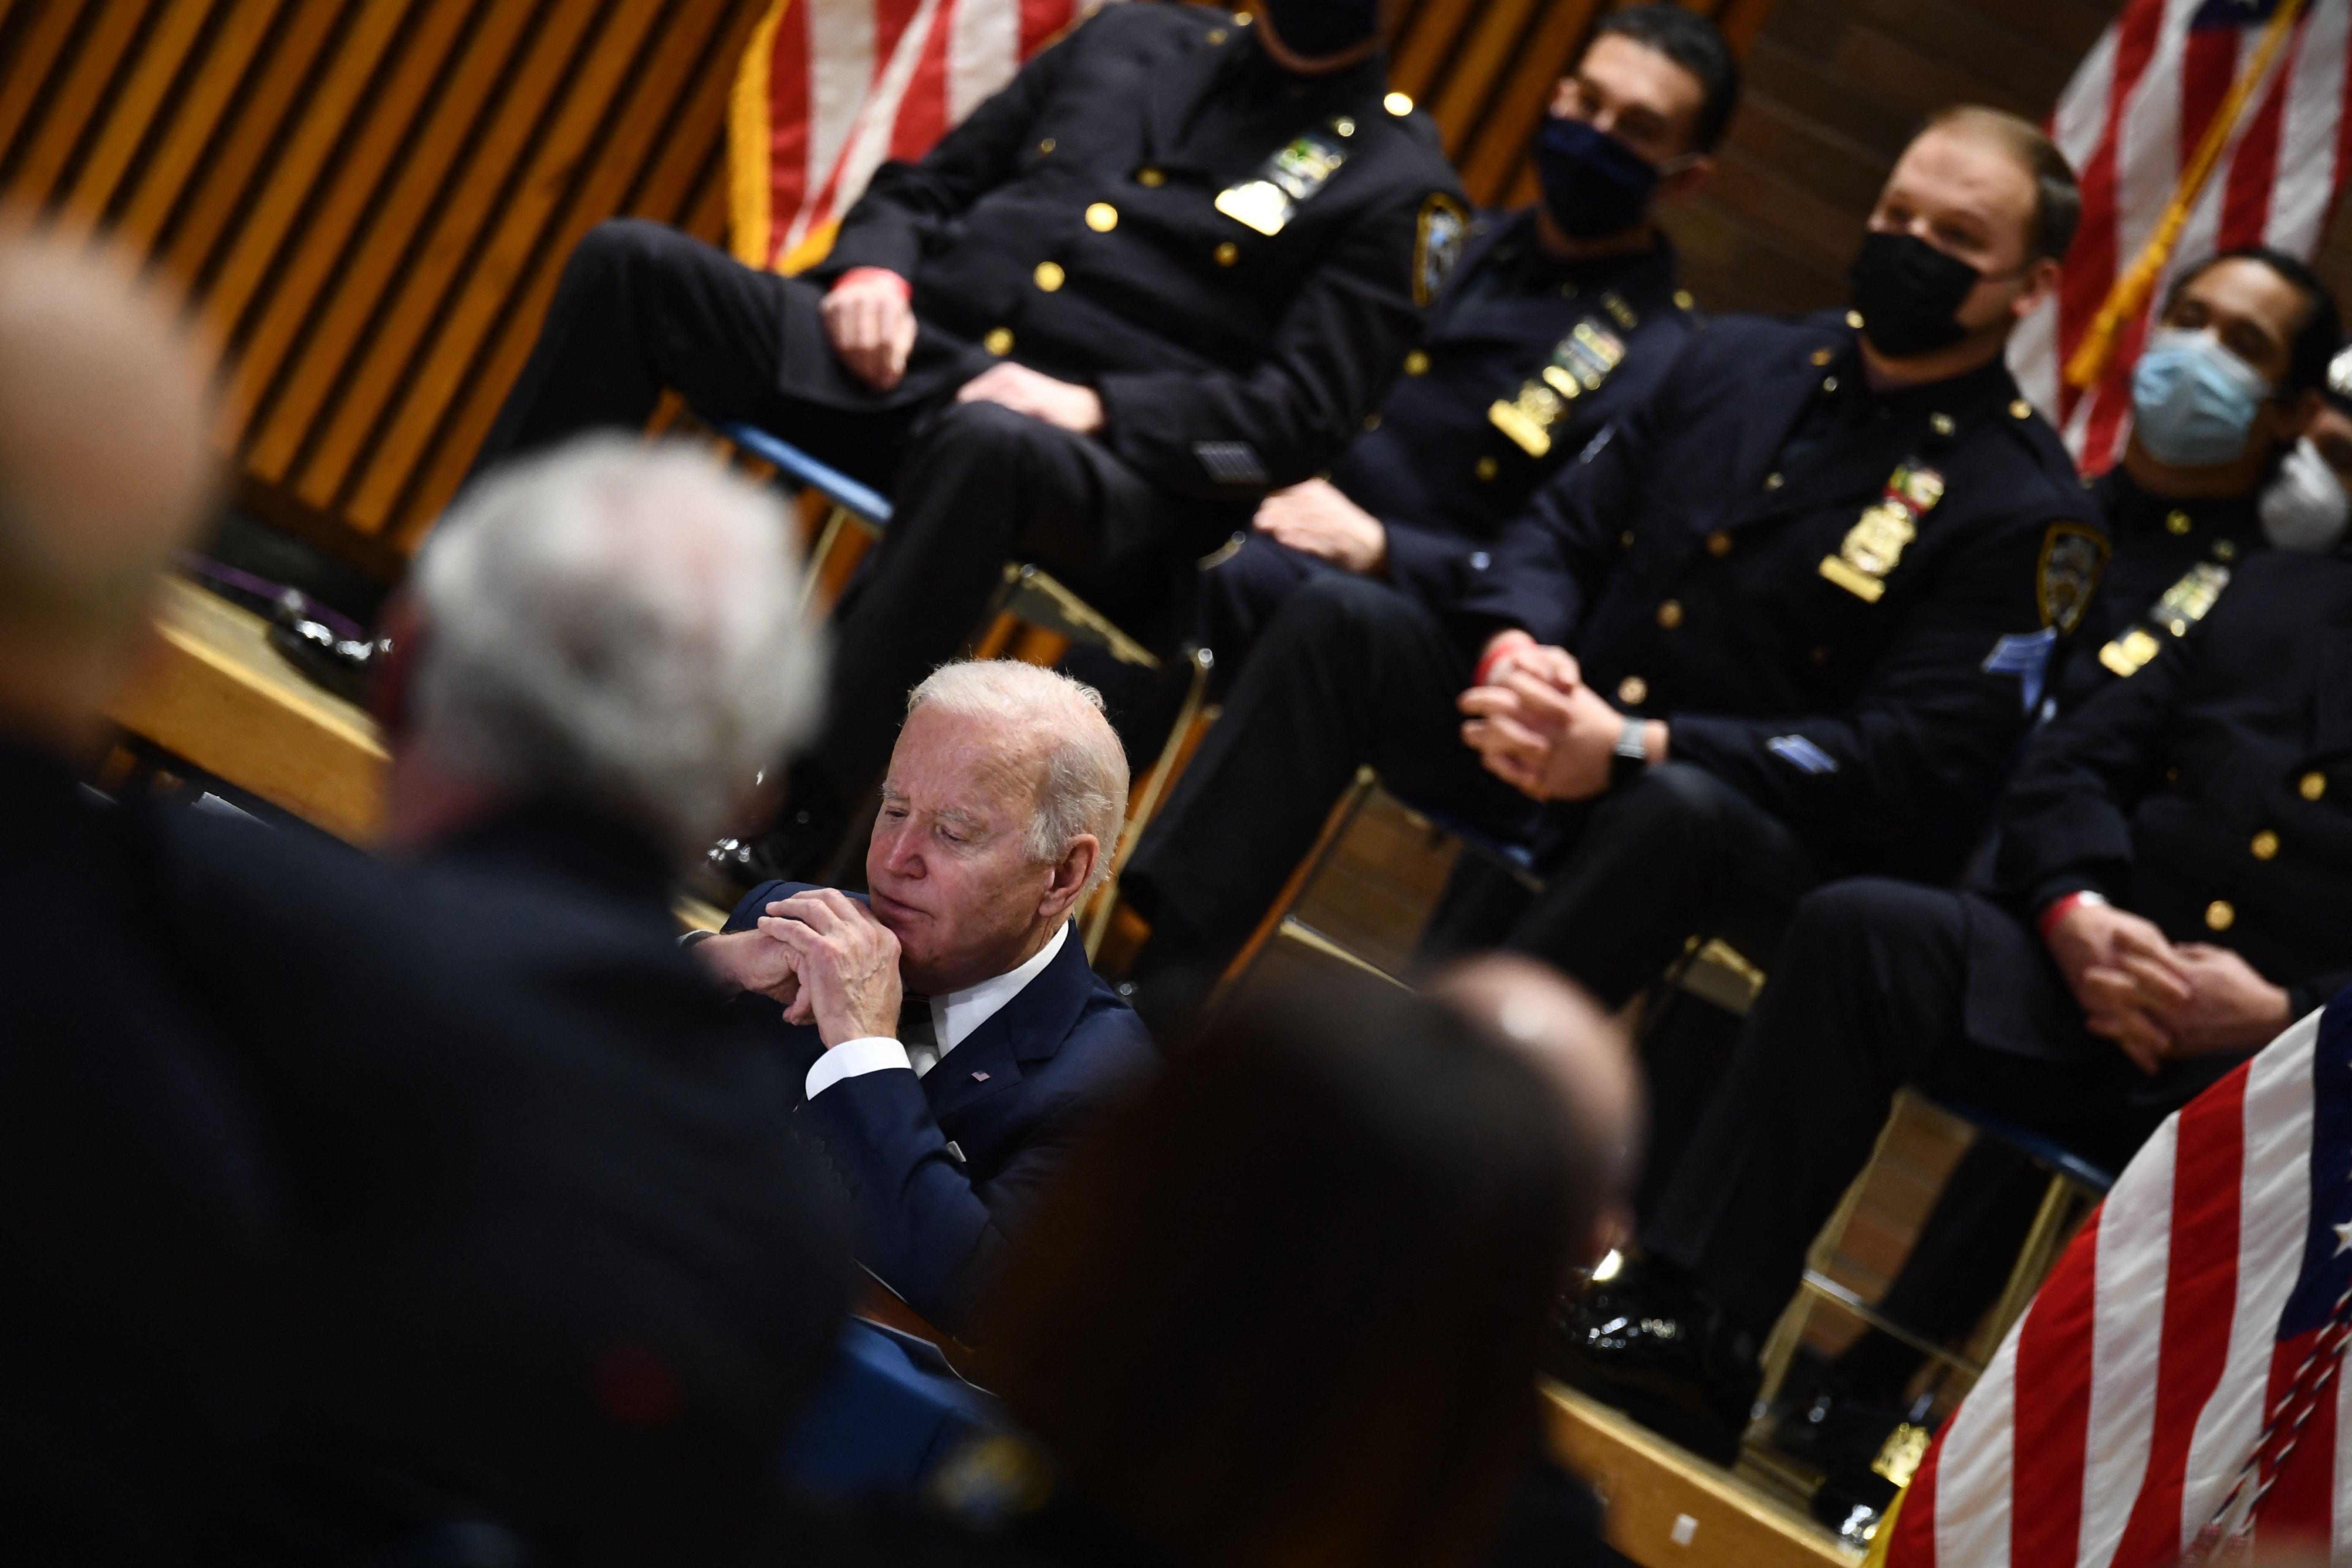 US President Joe Biden participates in a Gun Violence Strategies Partnership meeting at the NYPD Headquarters in New York on February 3, 2022